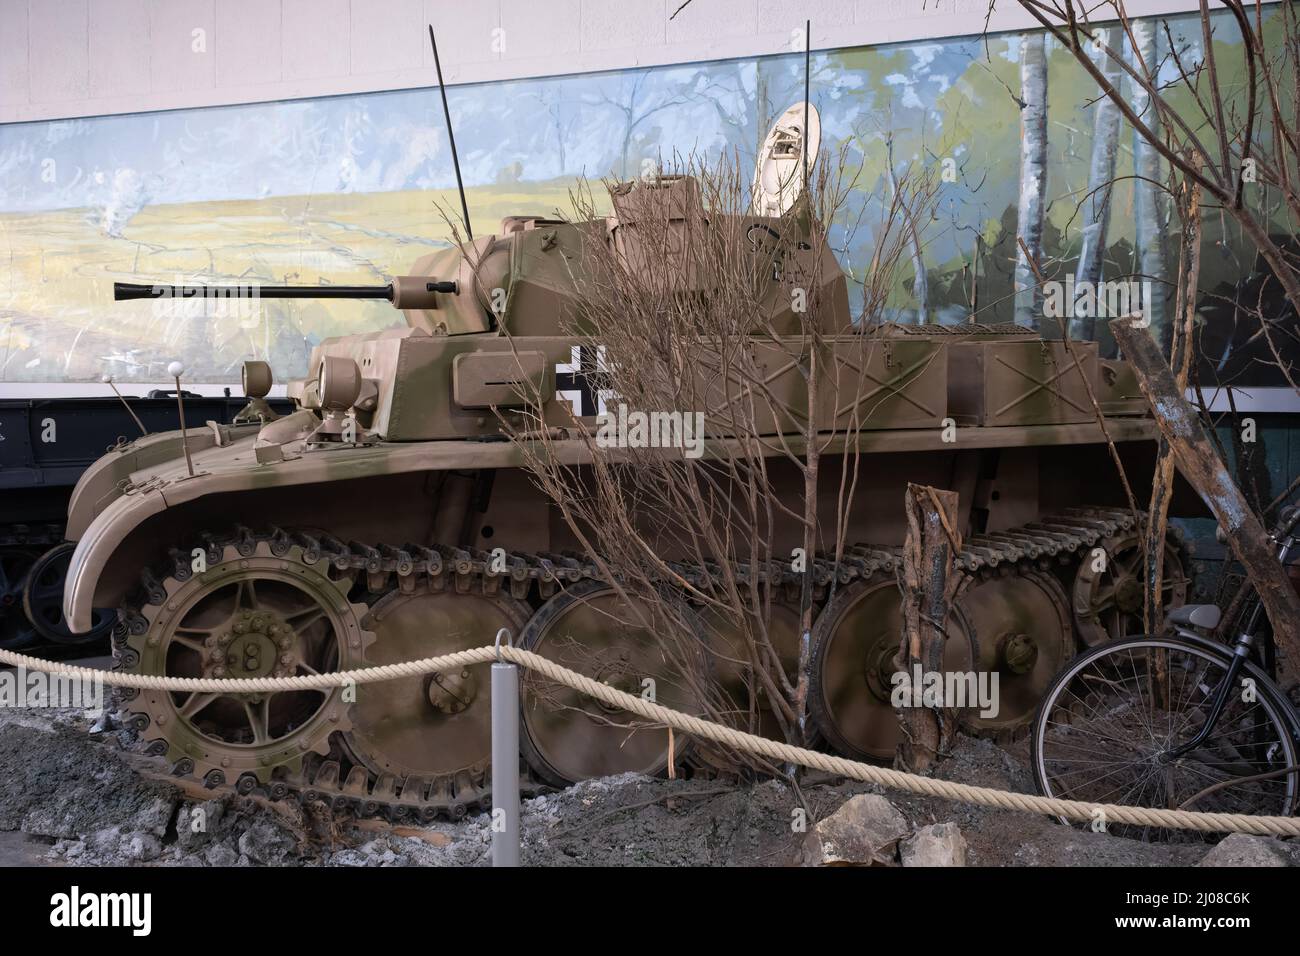 Saumur, France - February 26, 2022:  German Lynx or Luchs (Panzer II Sd. Kfz. 123). Tank museum in Saumur (Musee des Blindes). Second world war exhibi Stock Photo